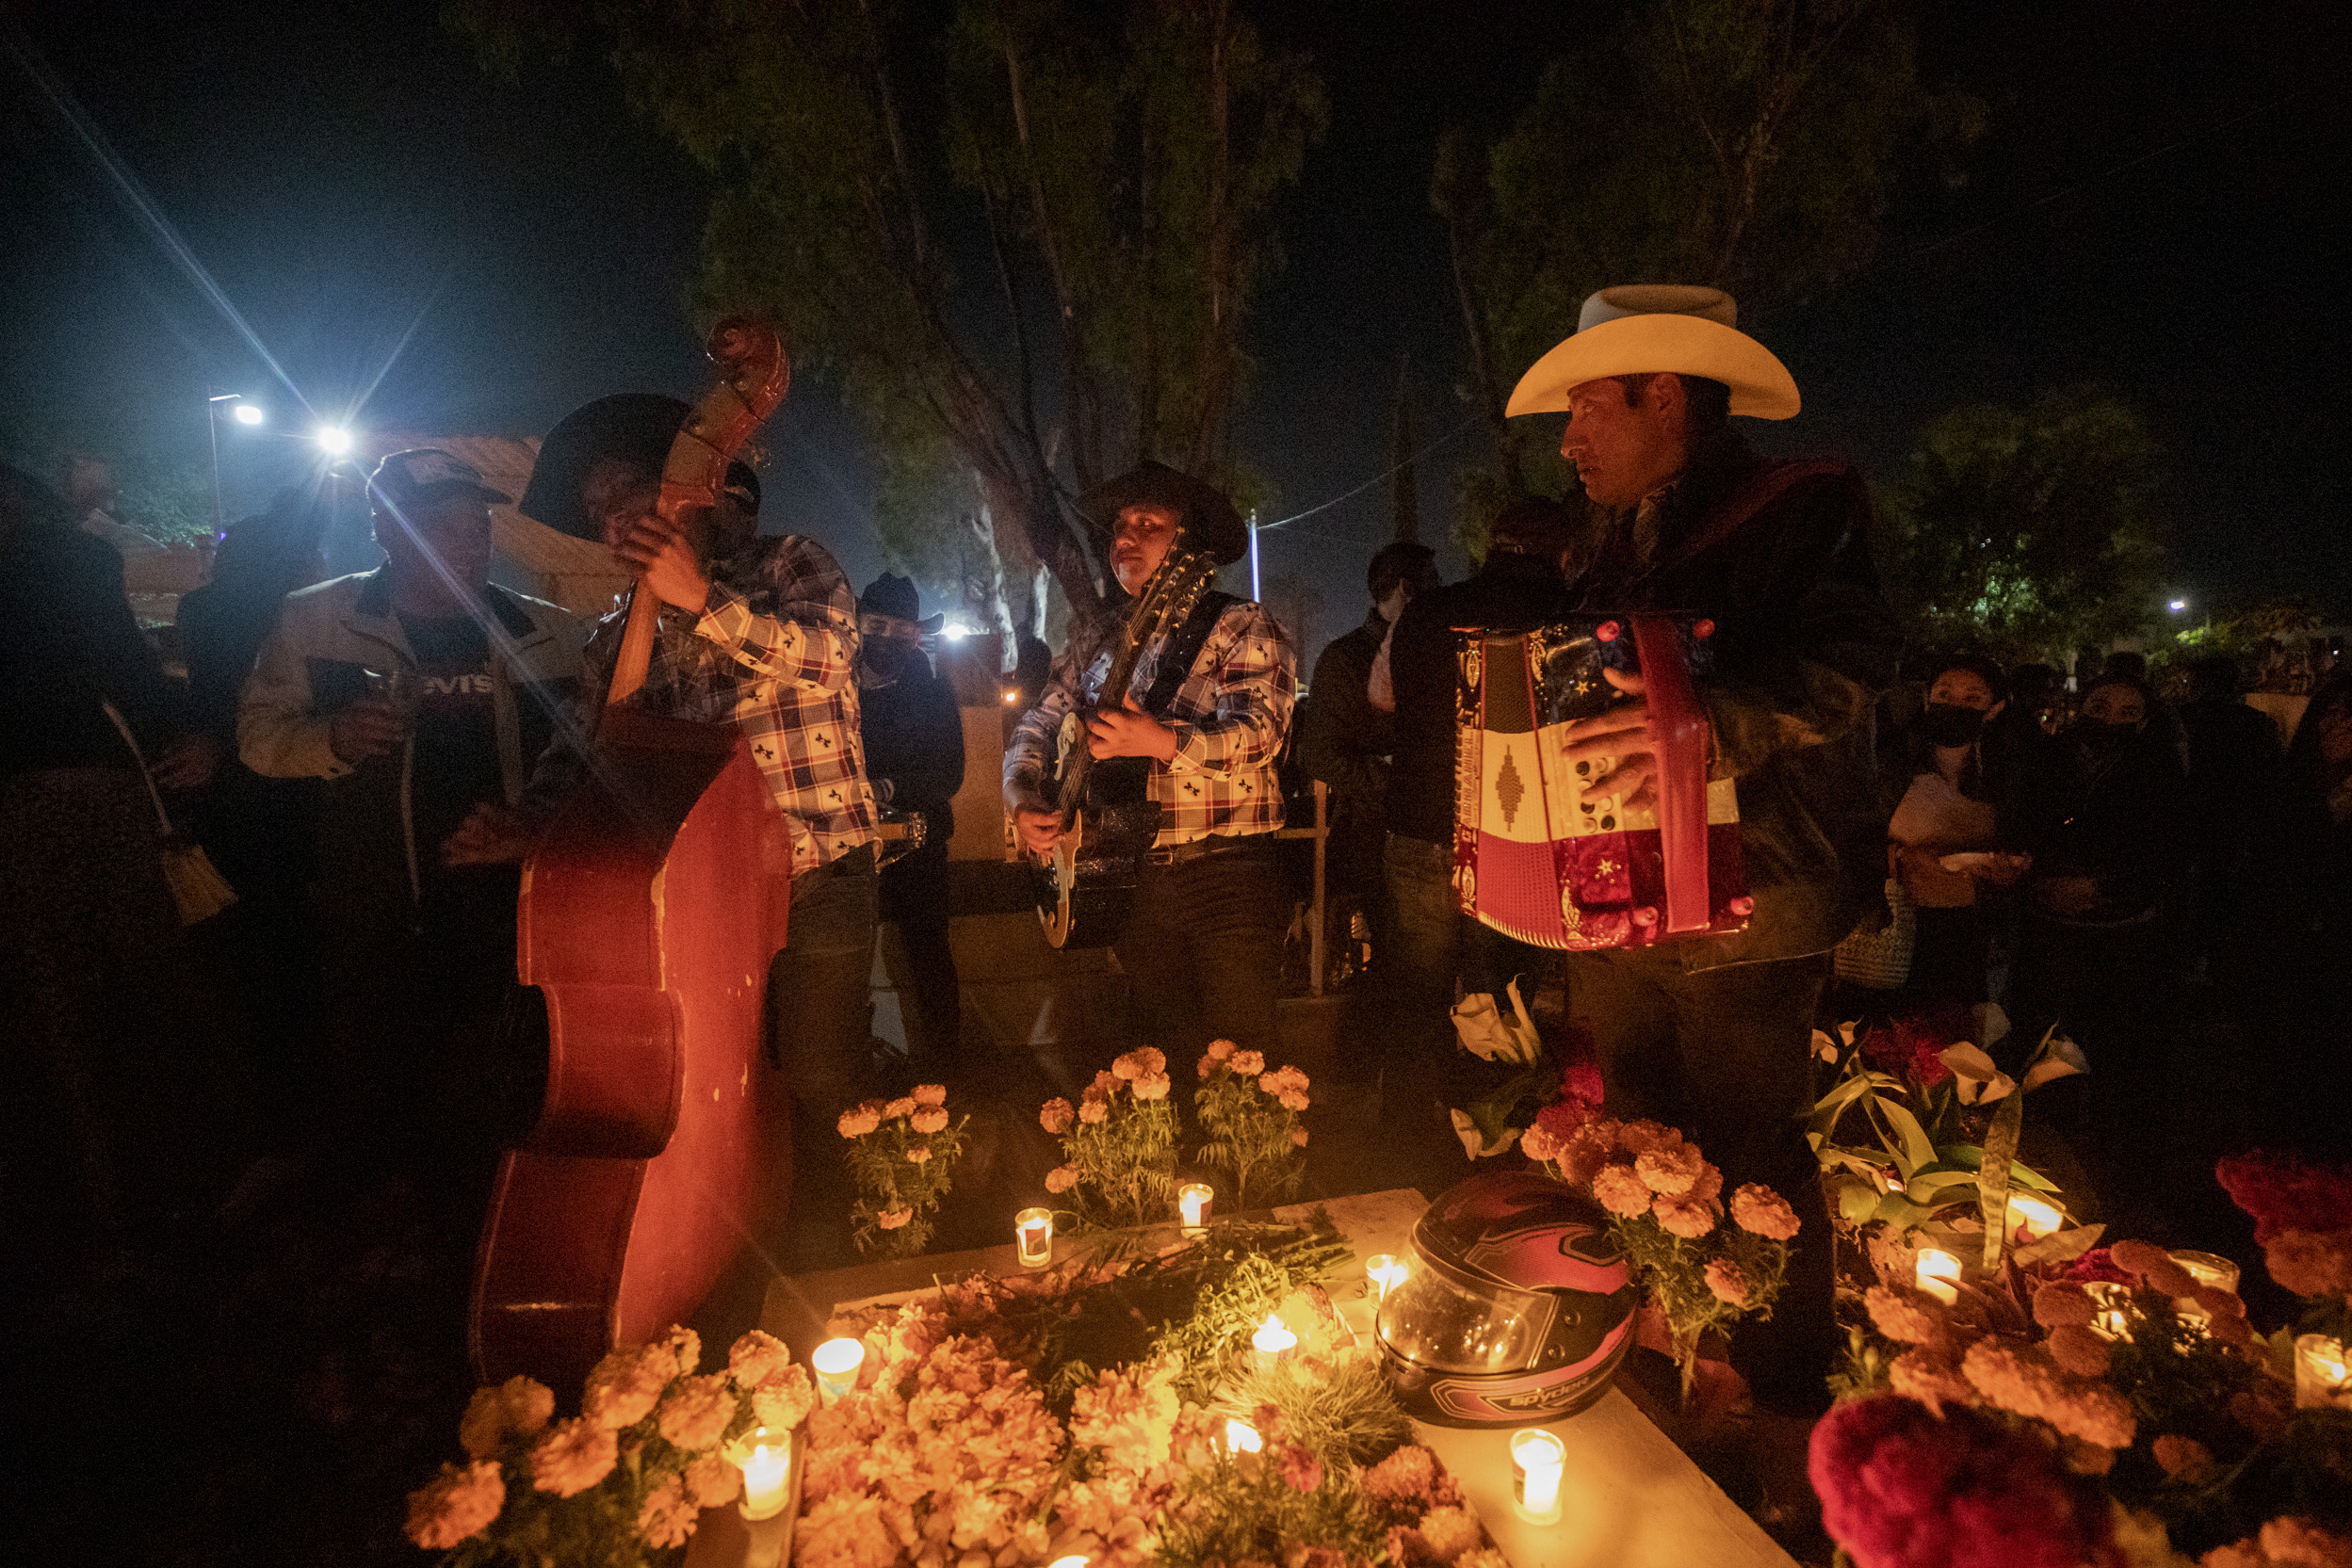 31 October 2022, Mexico, Oaxaca: People play music at a decorated cemetery on All Saints' Day which celebrates the Day of the Dead. Photo: Felipe Perez/dpa